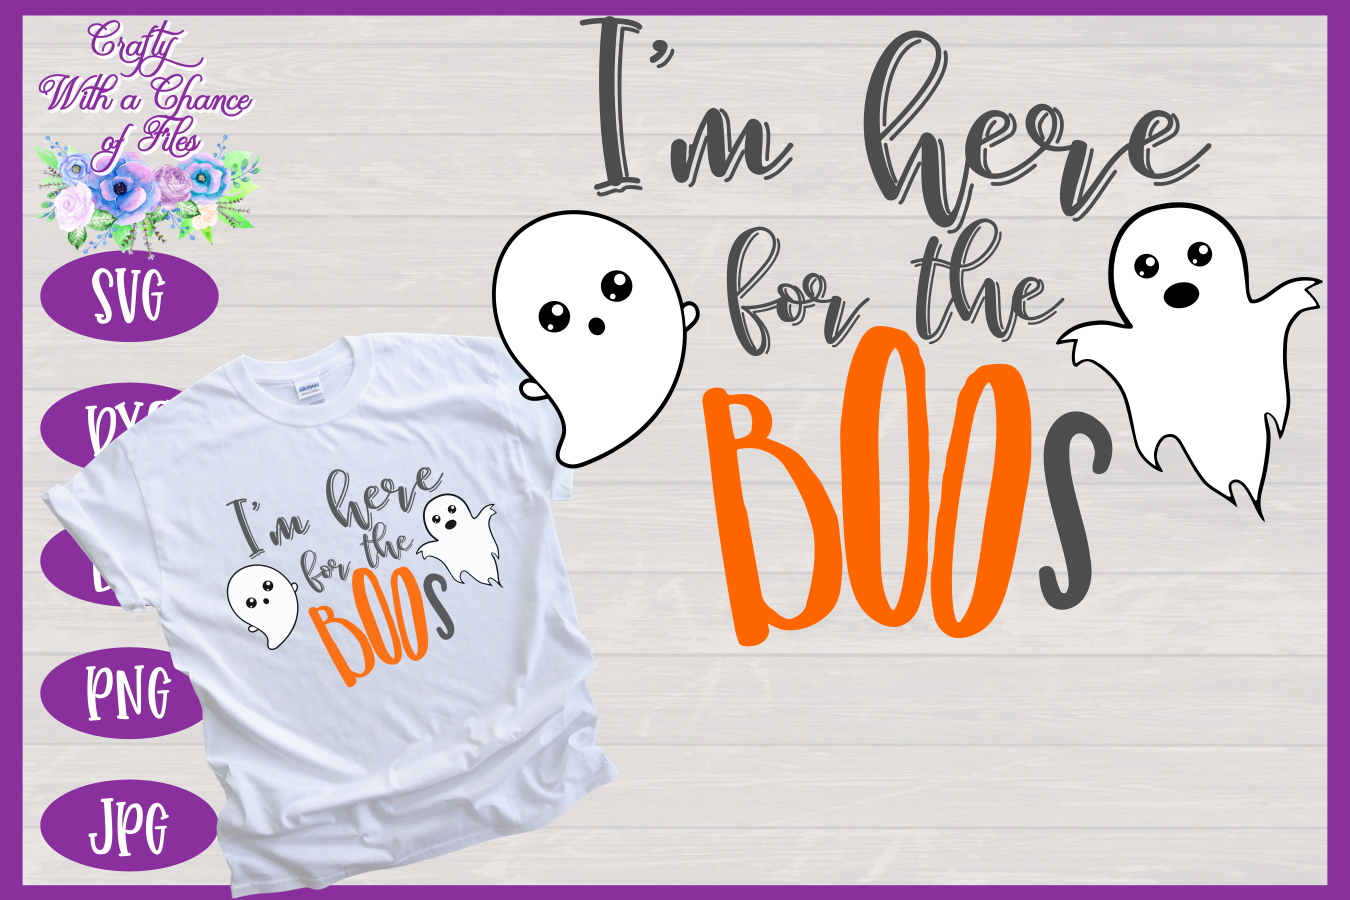 Halloween Svg Here For The Boos Svg Cute Ghost Svg By Crafty With A Chance Of Files Thehungryjpeg Com